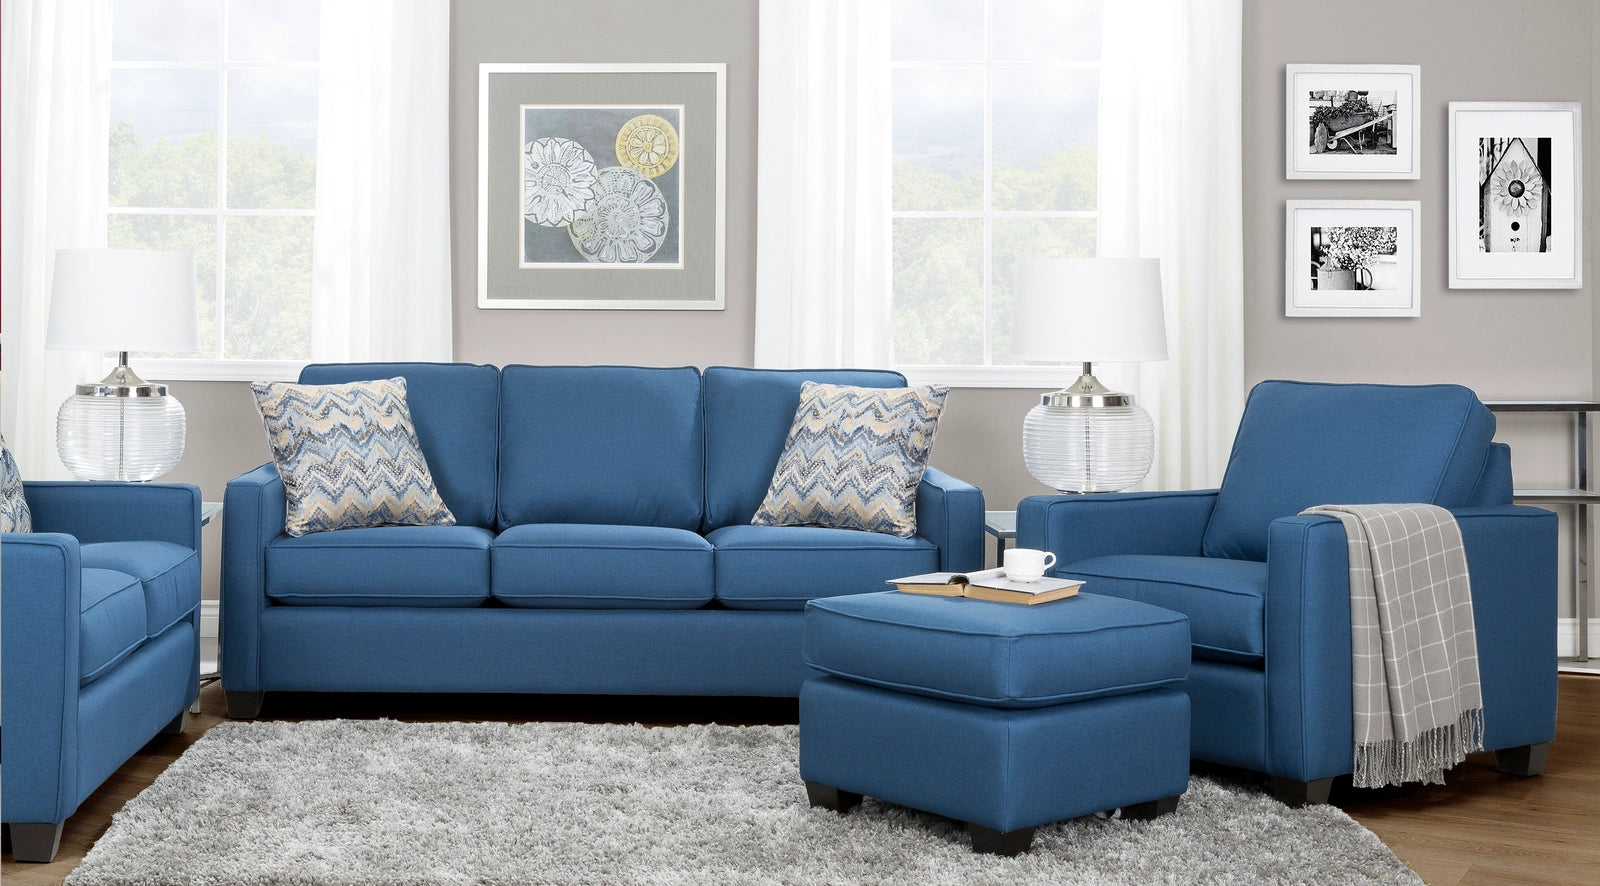 Modern Comfort  Queen Size  79" Sofabed  (also70 "double  size)